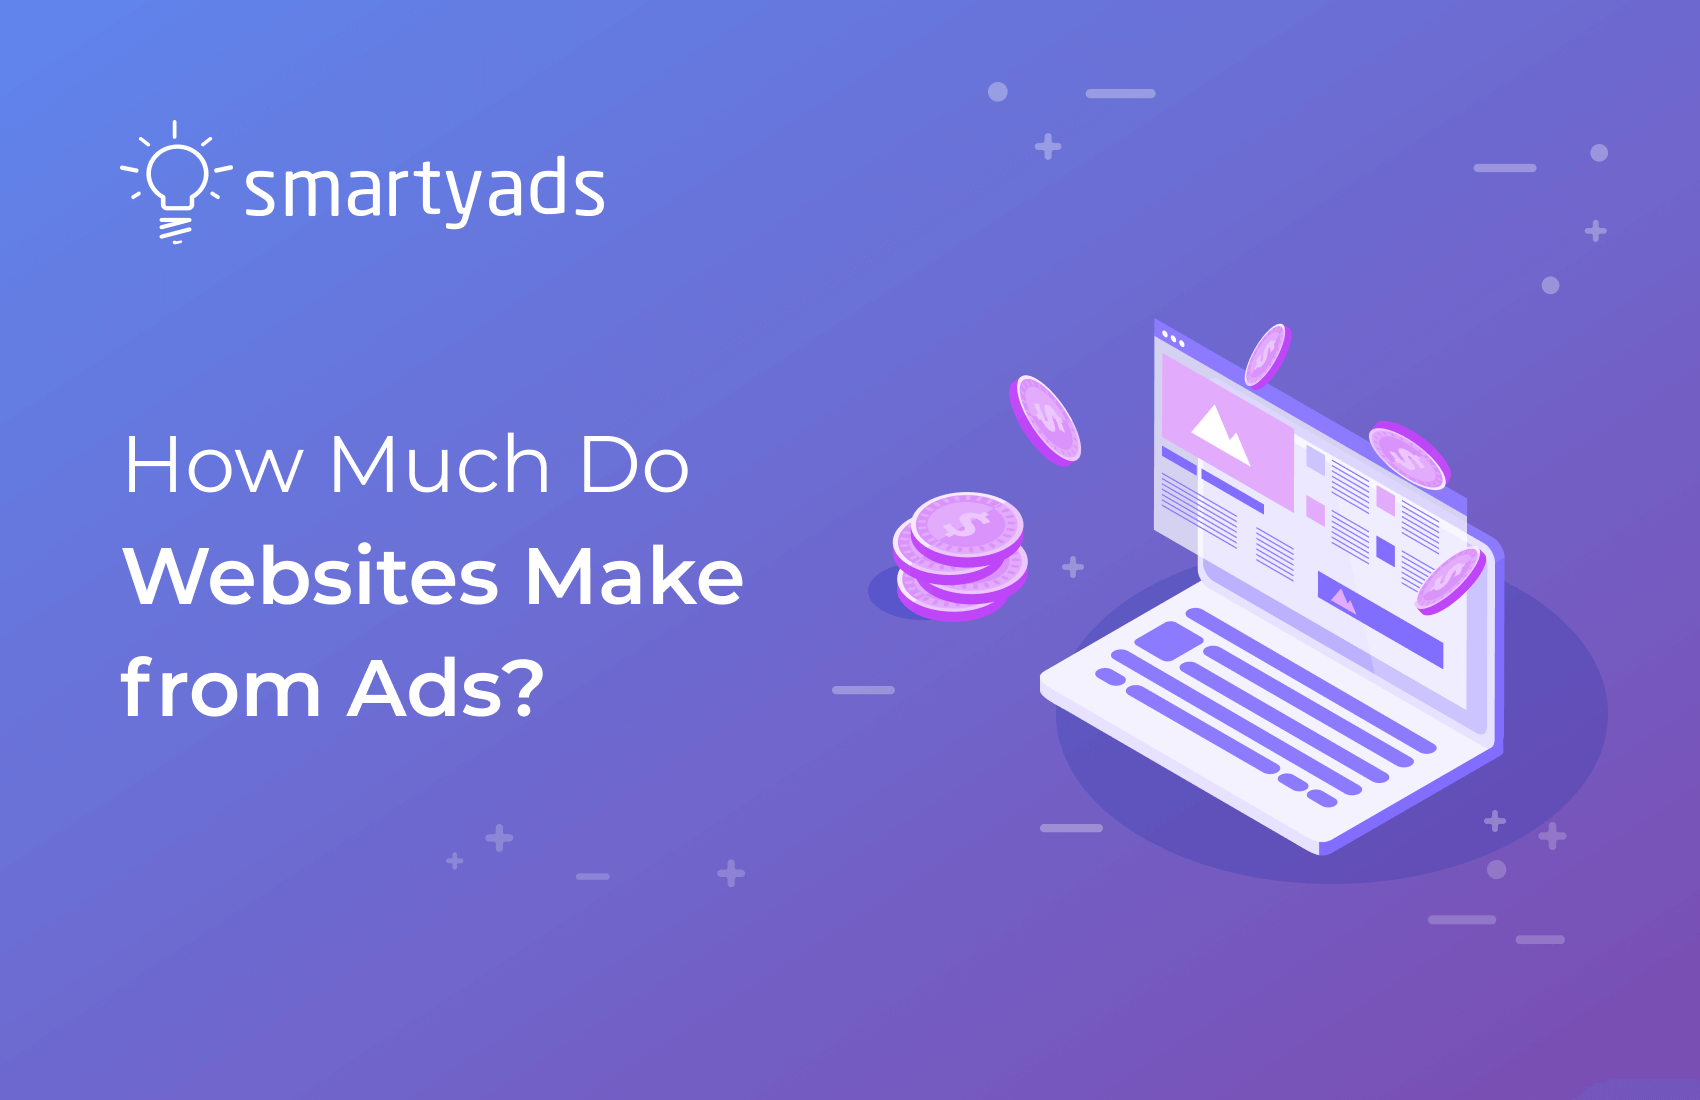 How Much Do You Make From Ads? And Why Your Website Can Do More